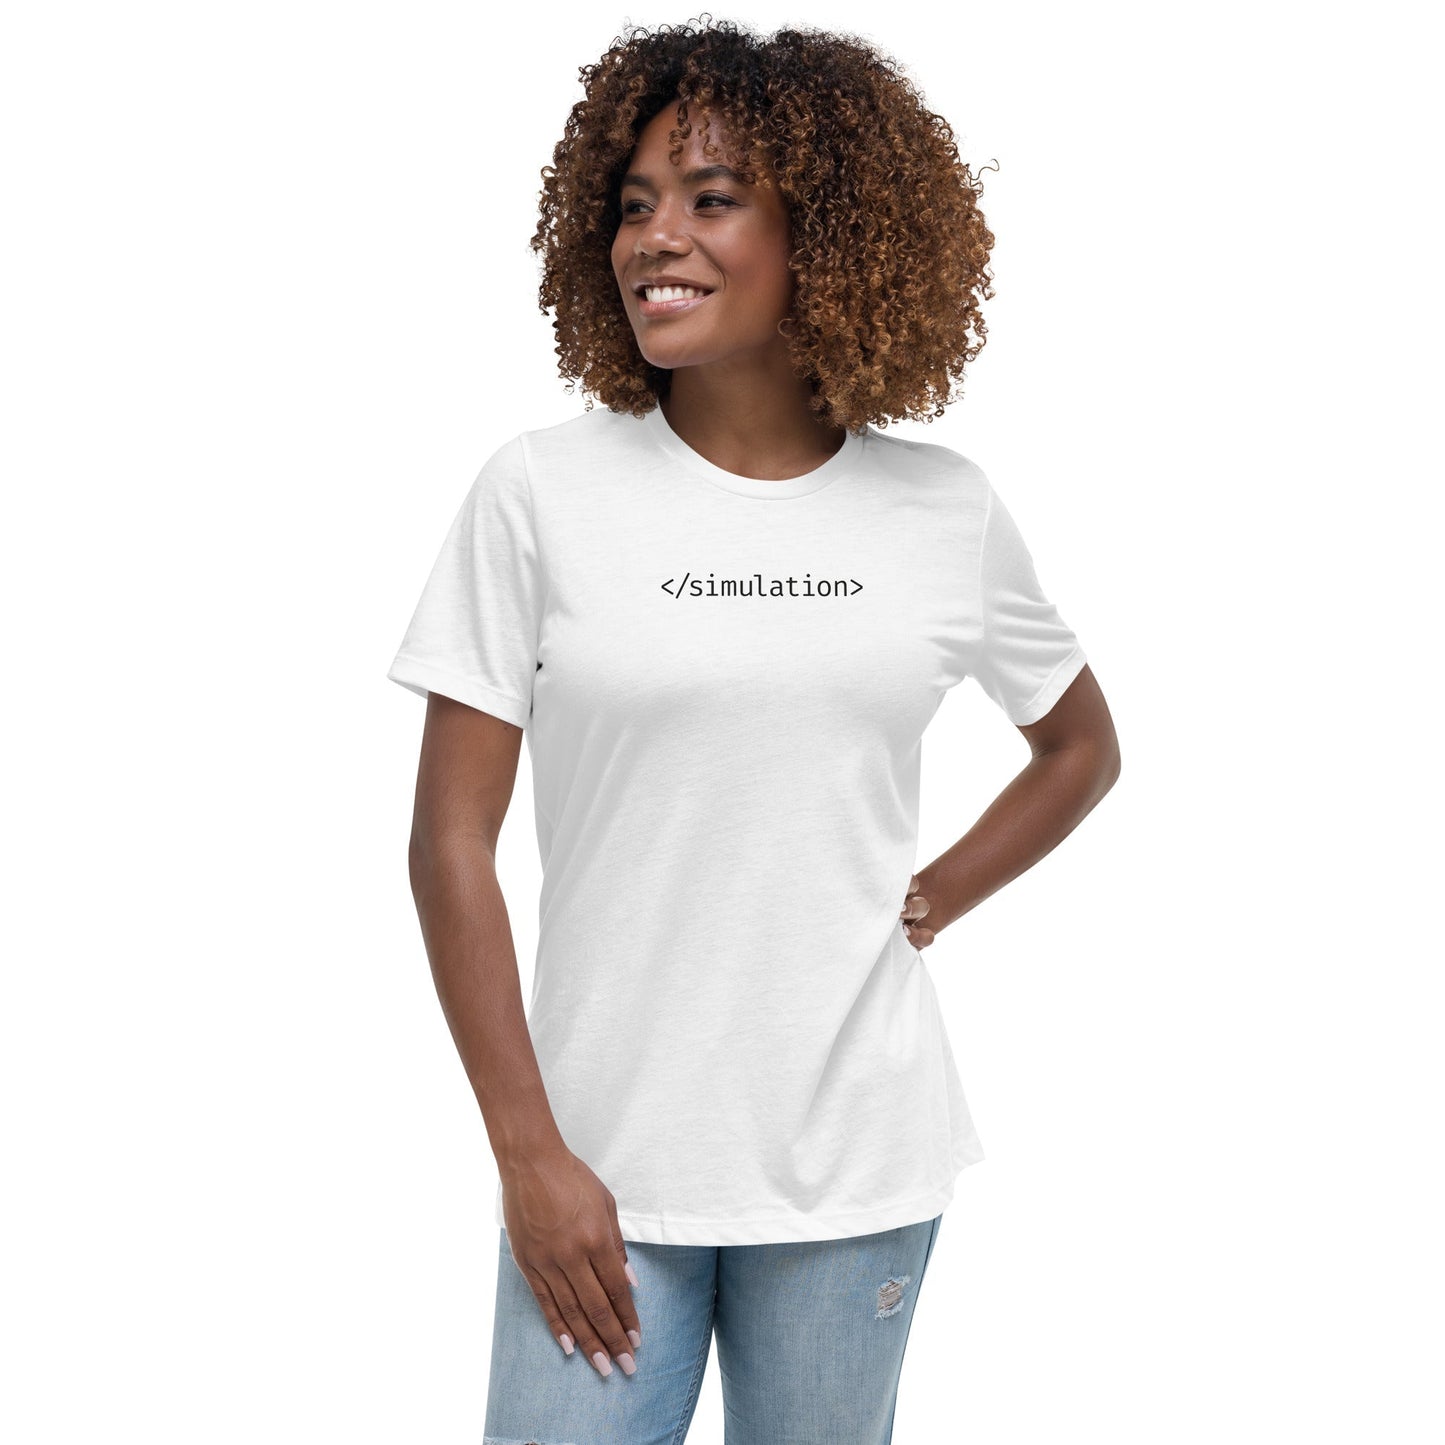 End of Simulation - Women's T-Shirt